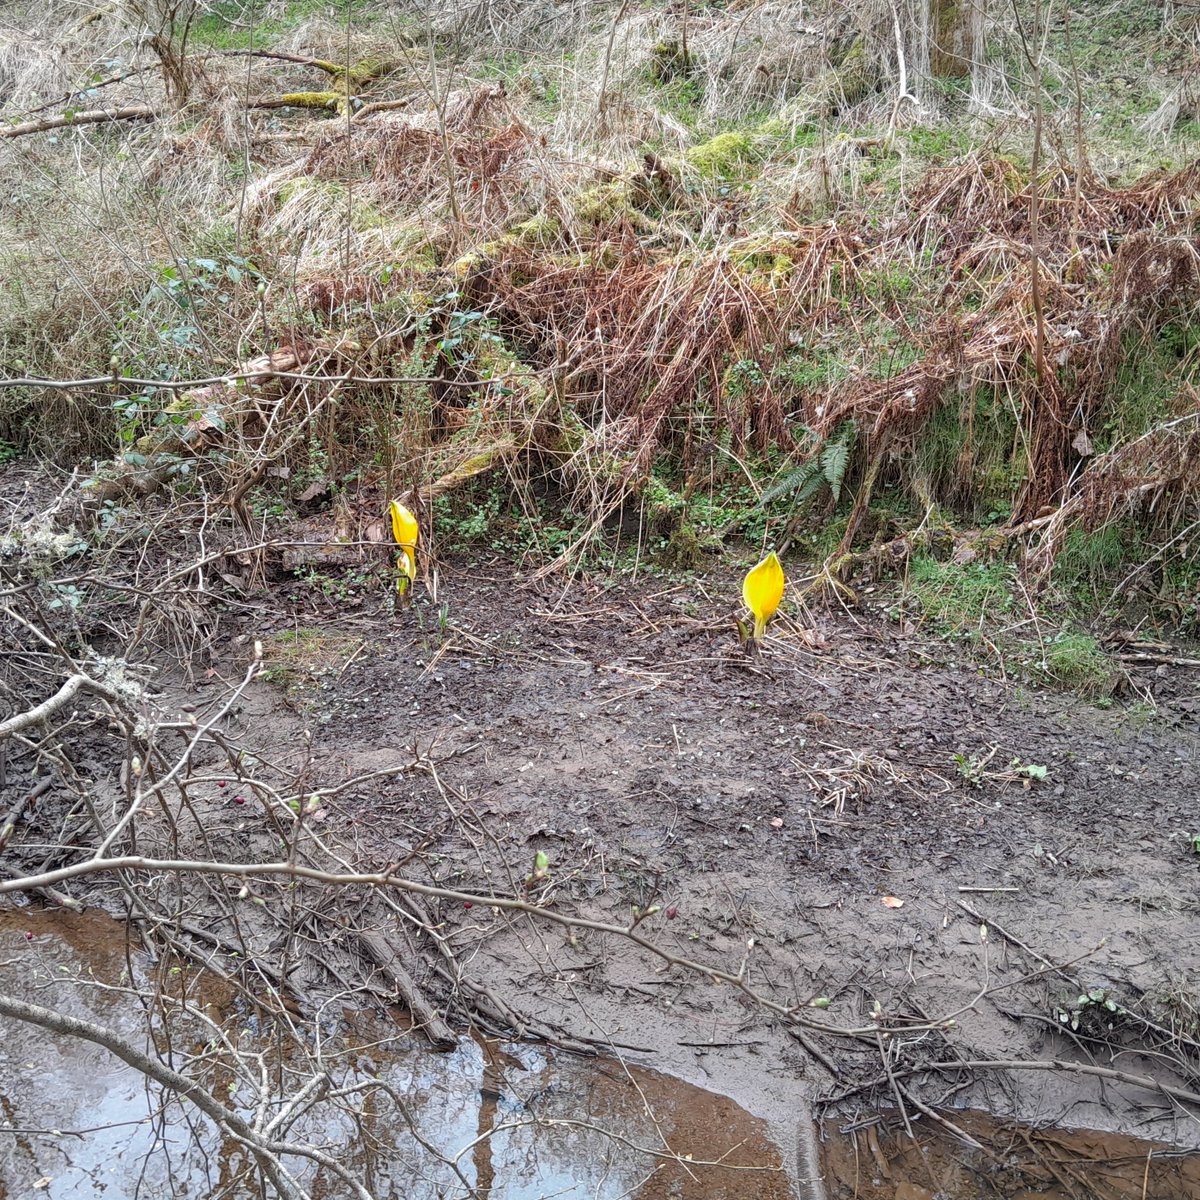 ⚠️🌱Have you seen this plant in Tayside?⚠️🌱 We have been controlling American skunk cabbage in Pitlochry for several years now but recently there's been sightings popping up all across the Tay catchment! Local PO Mark is working hard to get on top of the problem before- 1/2